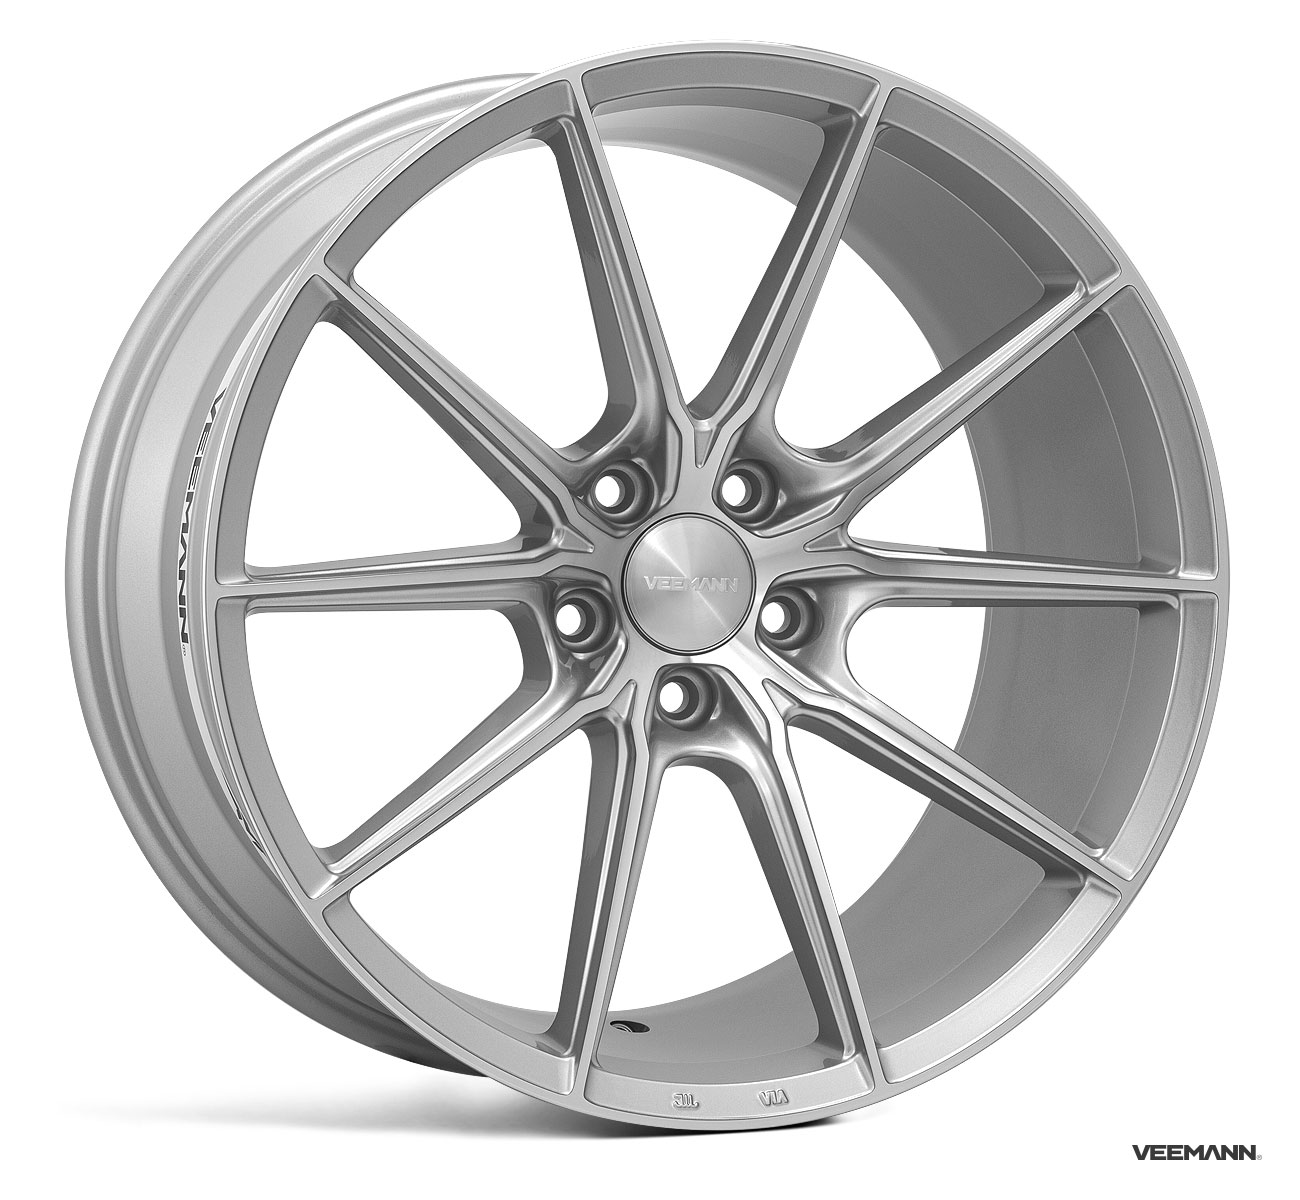 NEW 20" VEEMANN V-FS48 ALLOY WHEELS IN SILVER WITH POLISHED FACE WITH WIDER REARS